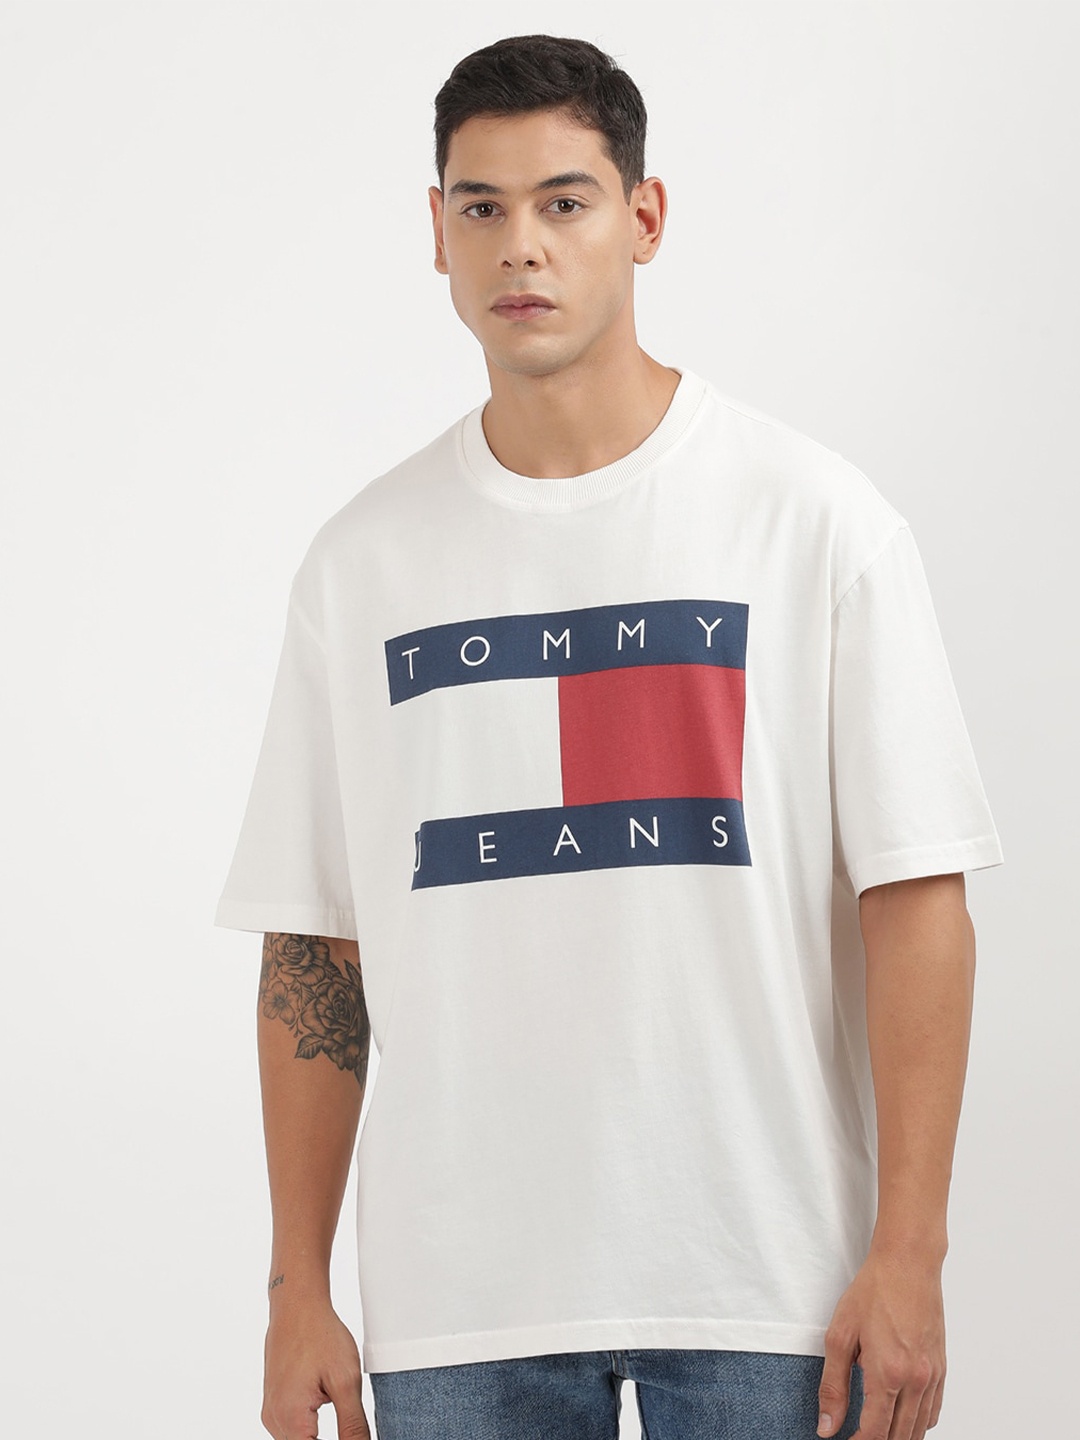 

Tommy Hilfiger Men Typography Printed Applique T-shirt, White